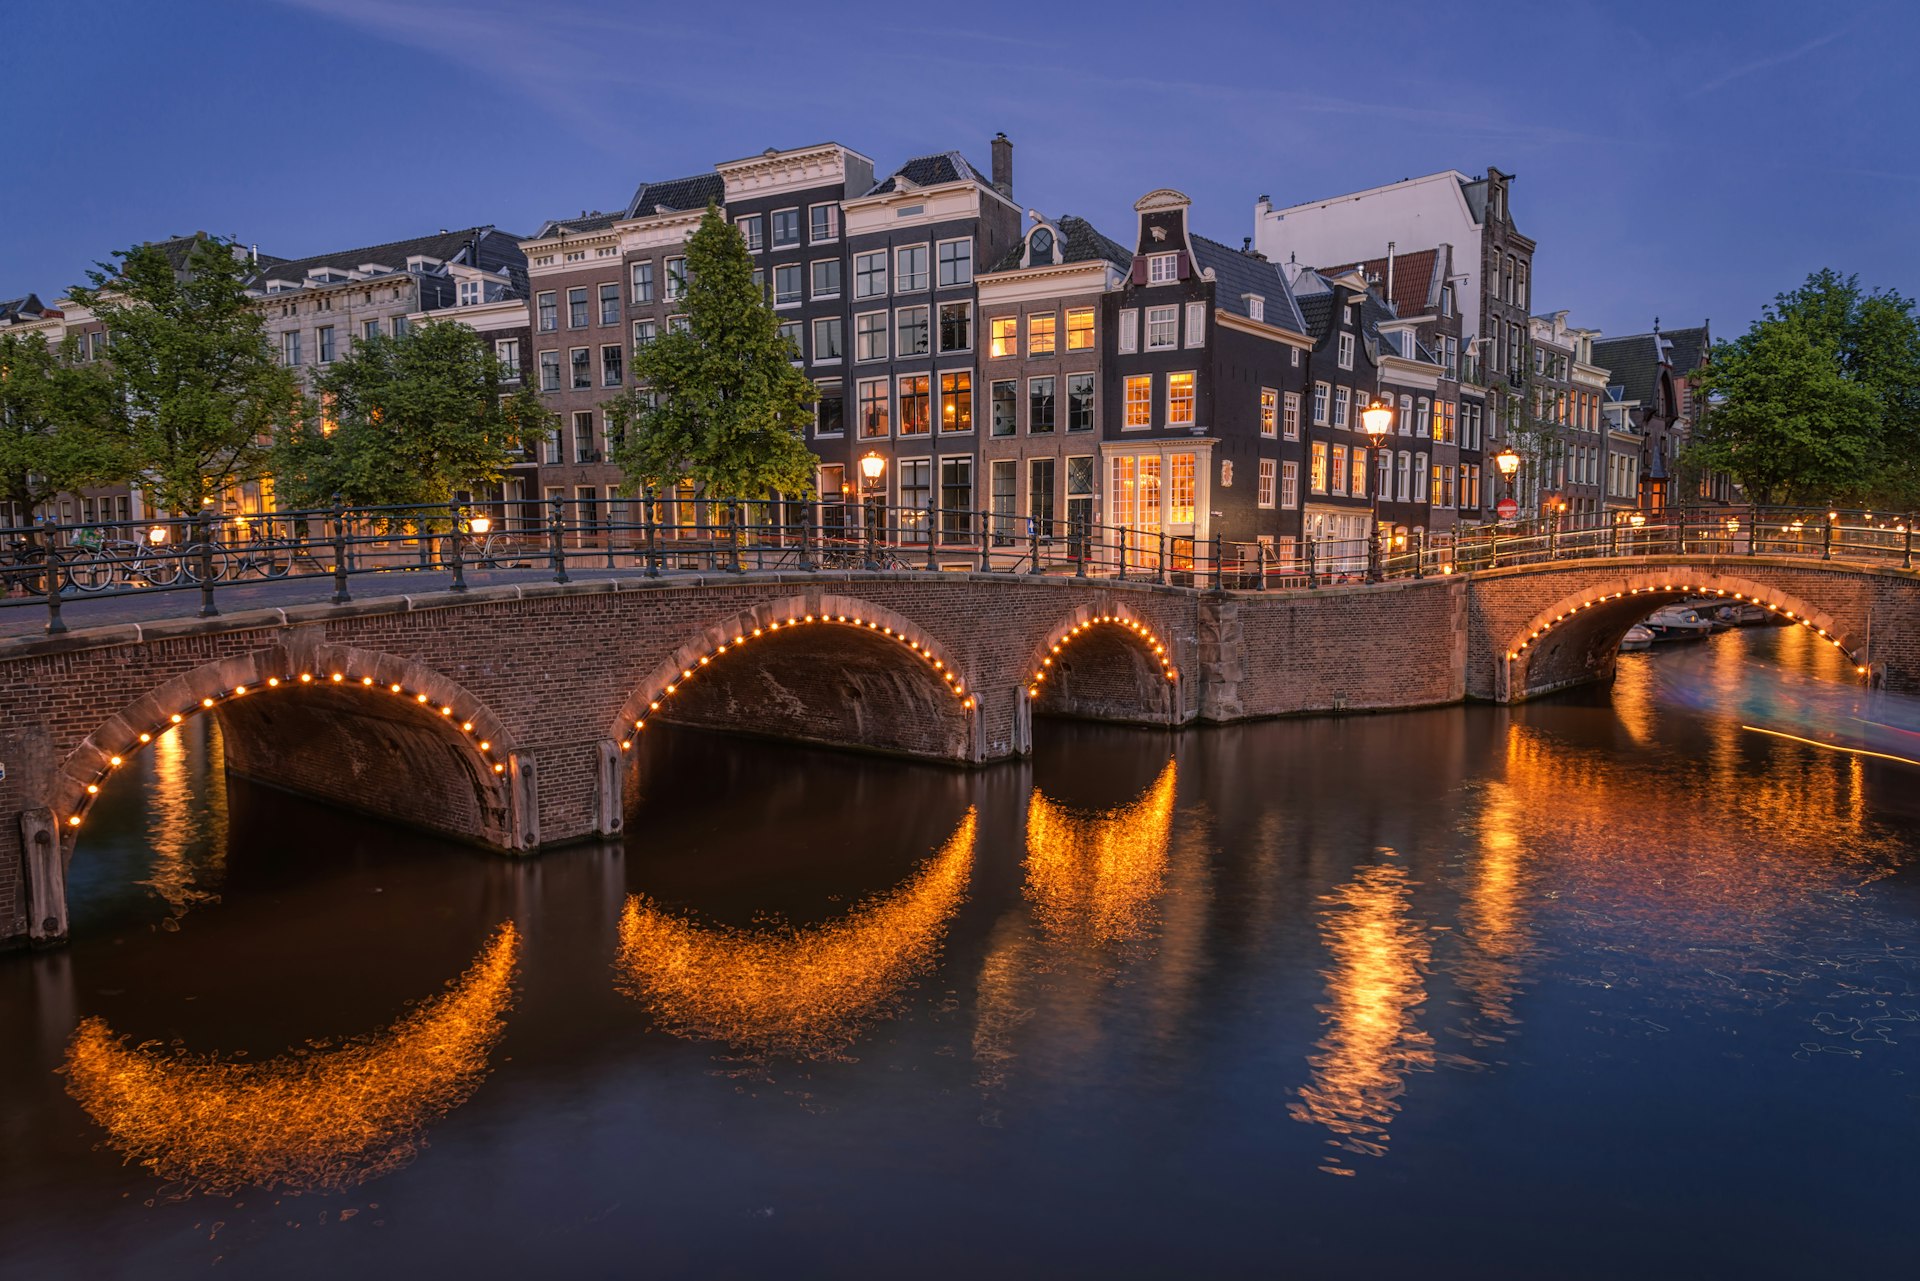 A bridge over a canal in Amsterdam at night